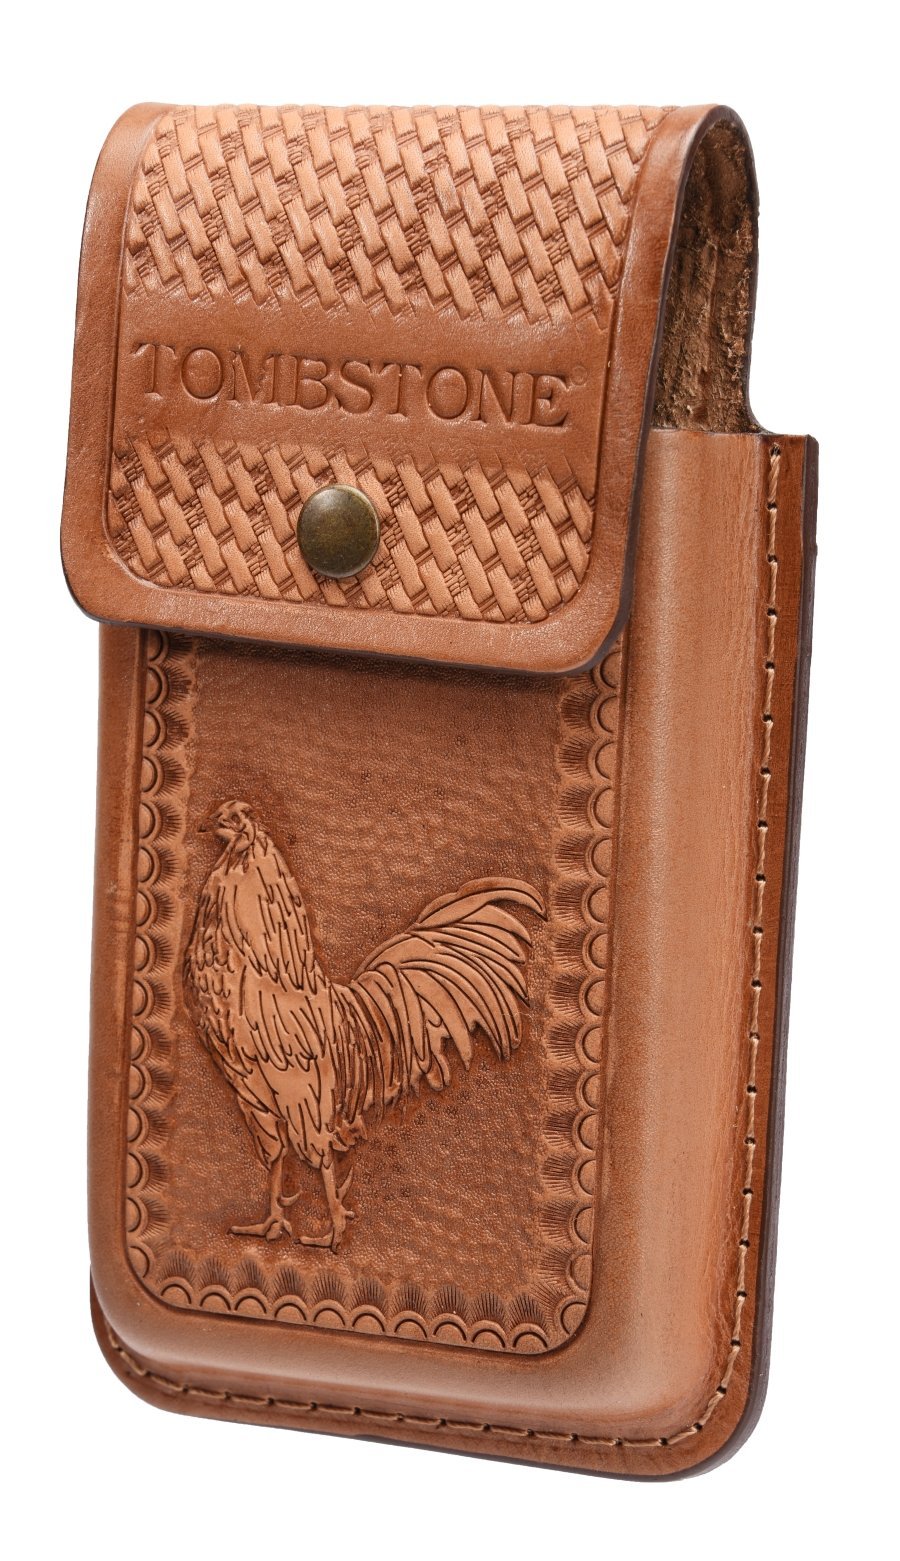 Tombstone Cellphone Case #4303